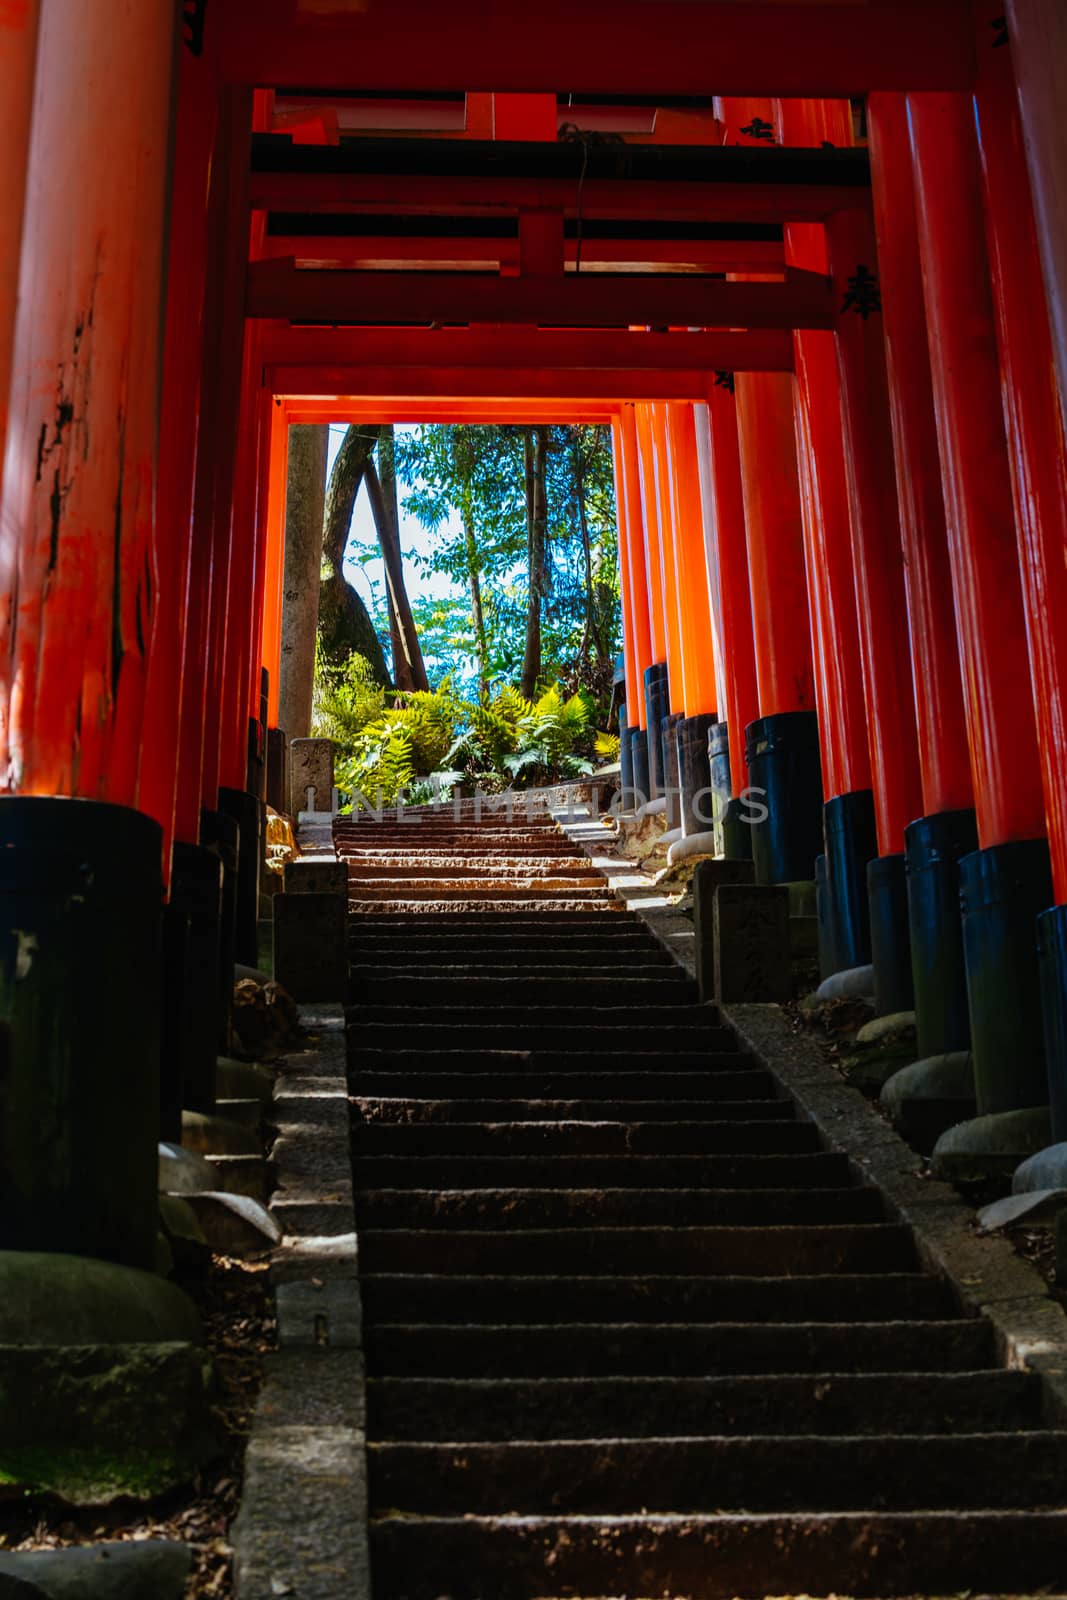 Red Tori Gate at Fushimi Inari Shrine in Kyoto, Japan. One of the largest tourist attractions in Japan